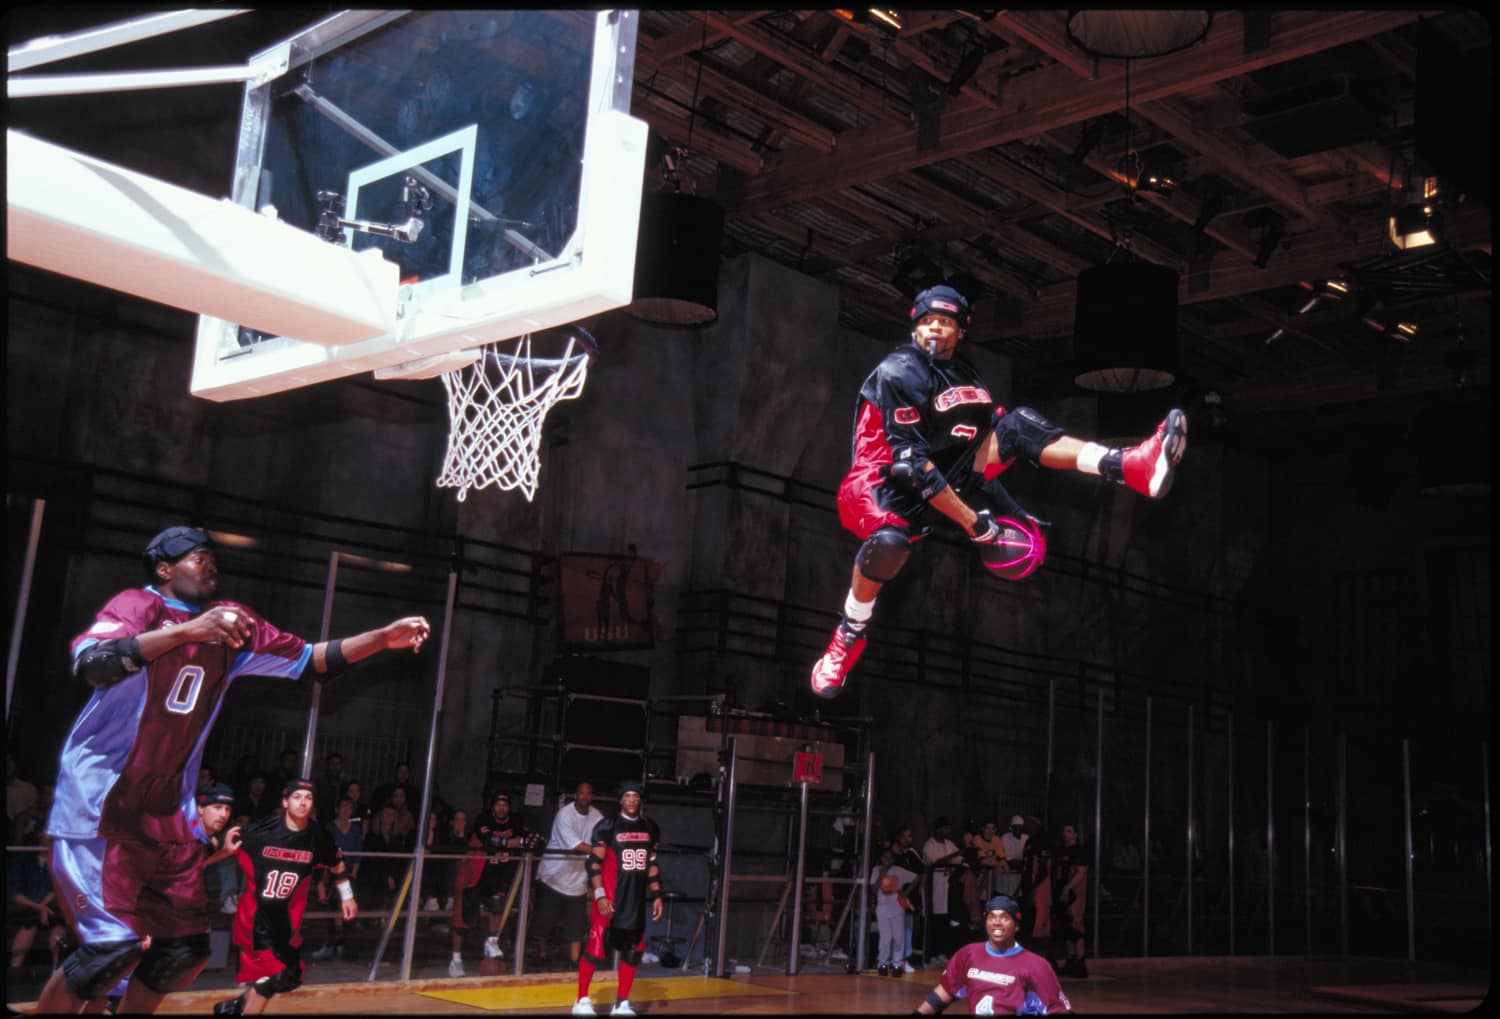 SlamBall, ESPN Announce Exclusive TwoYear Broadcast Partnership for